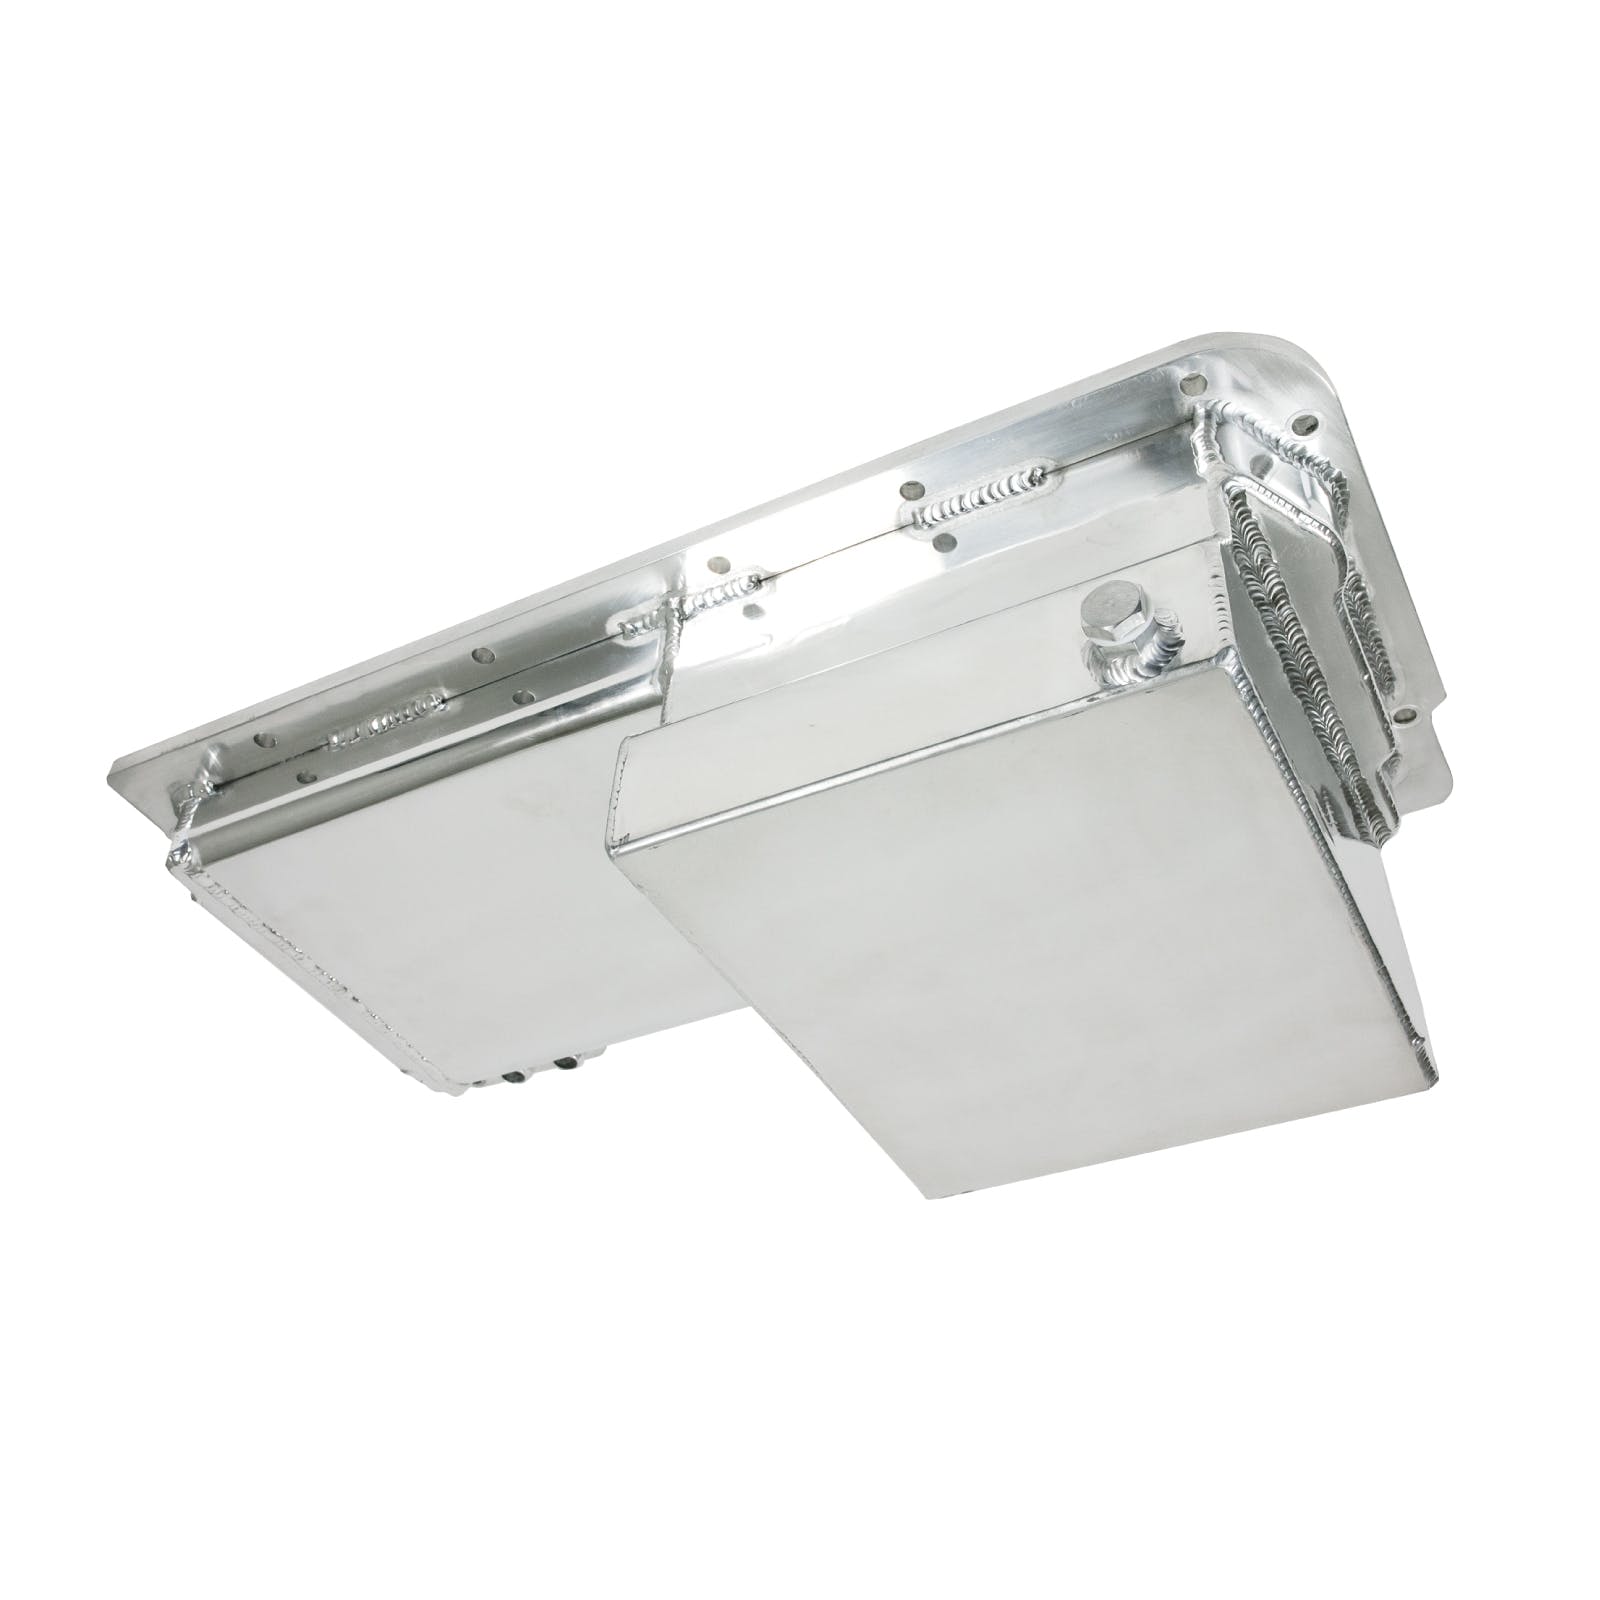 Top Street Performance 81004-P-F Oil Pan - Fabricated Aluminum Front Sump 7-Quart - LS, Polished